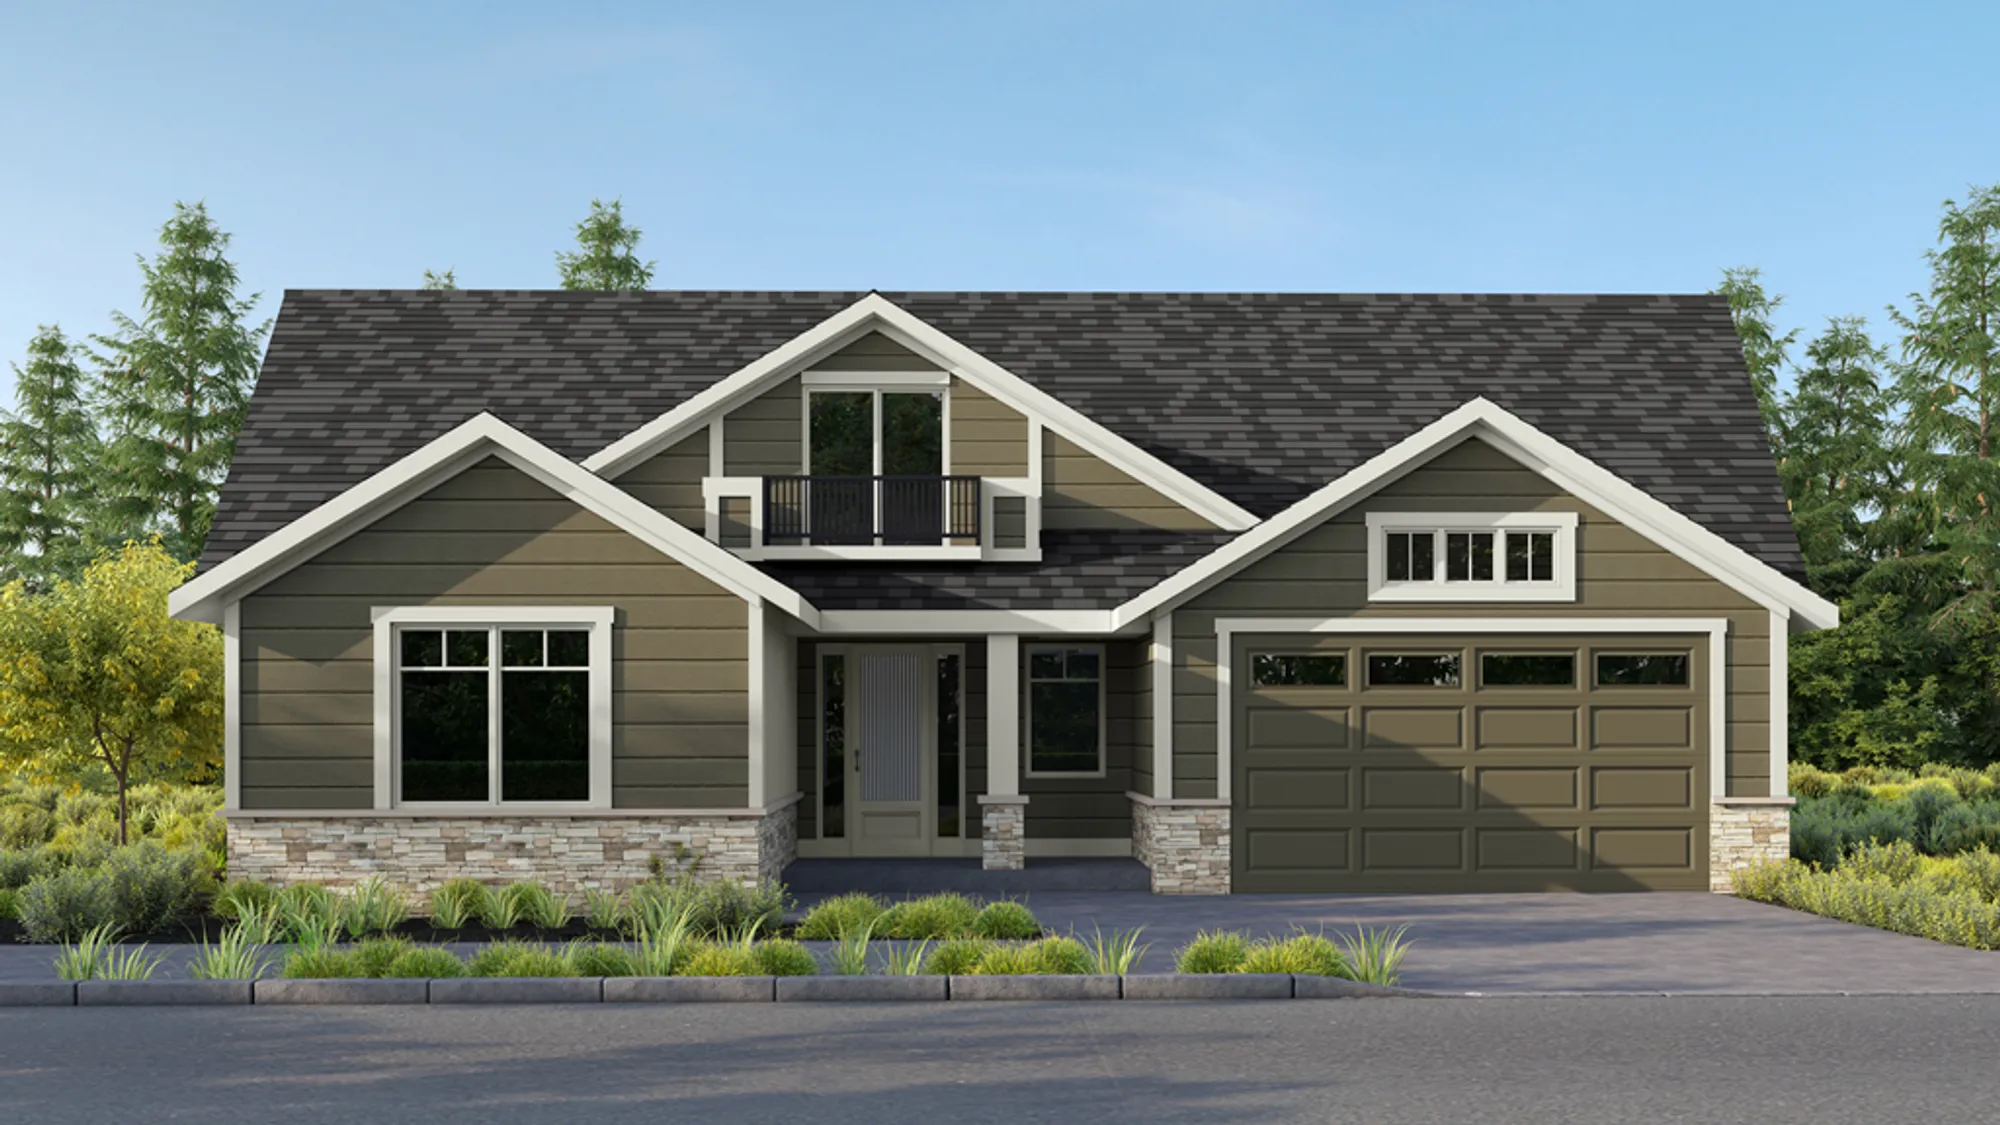 2645 Plan rendering - lot 10 will be our model home at Hillstad